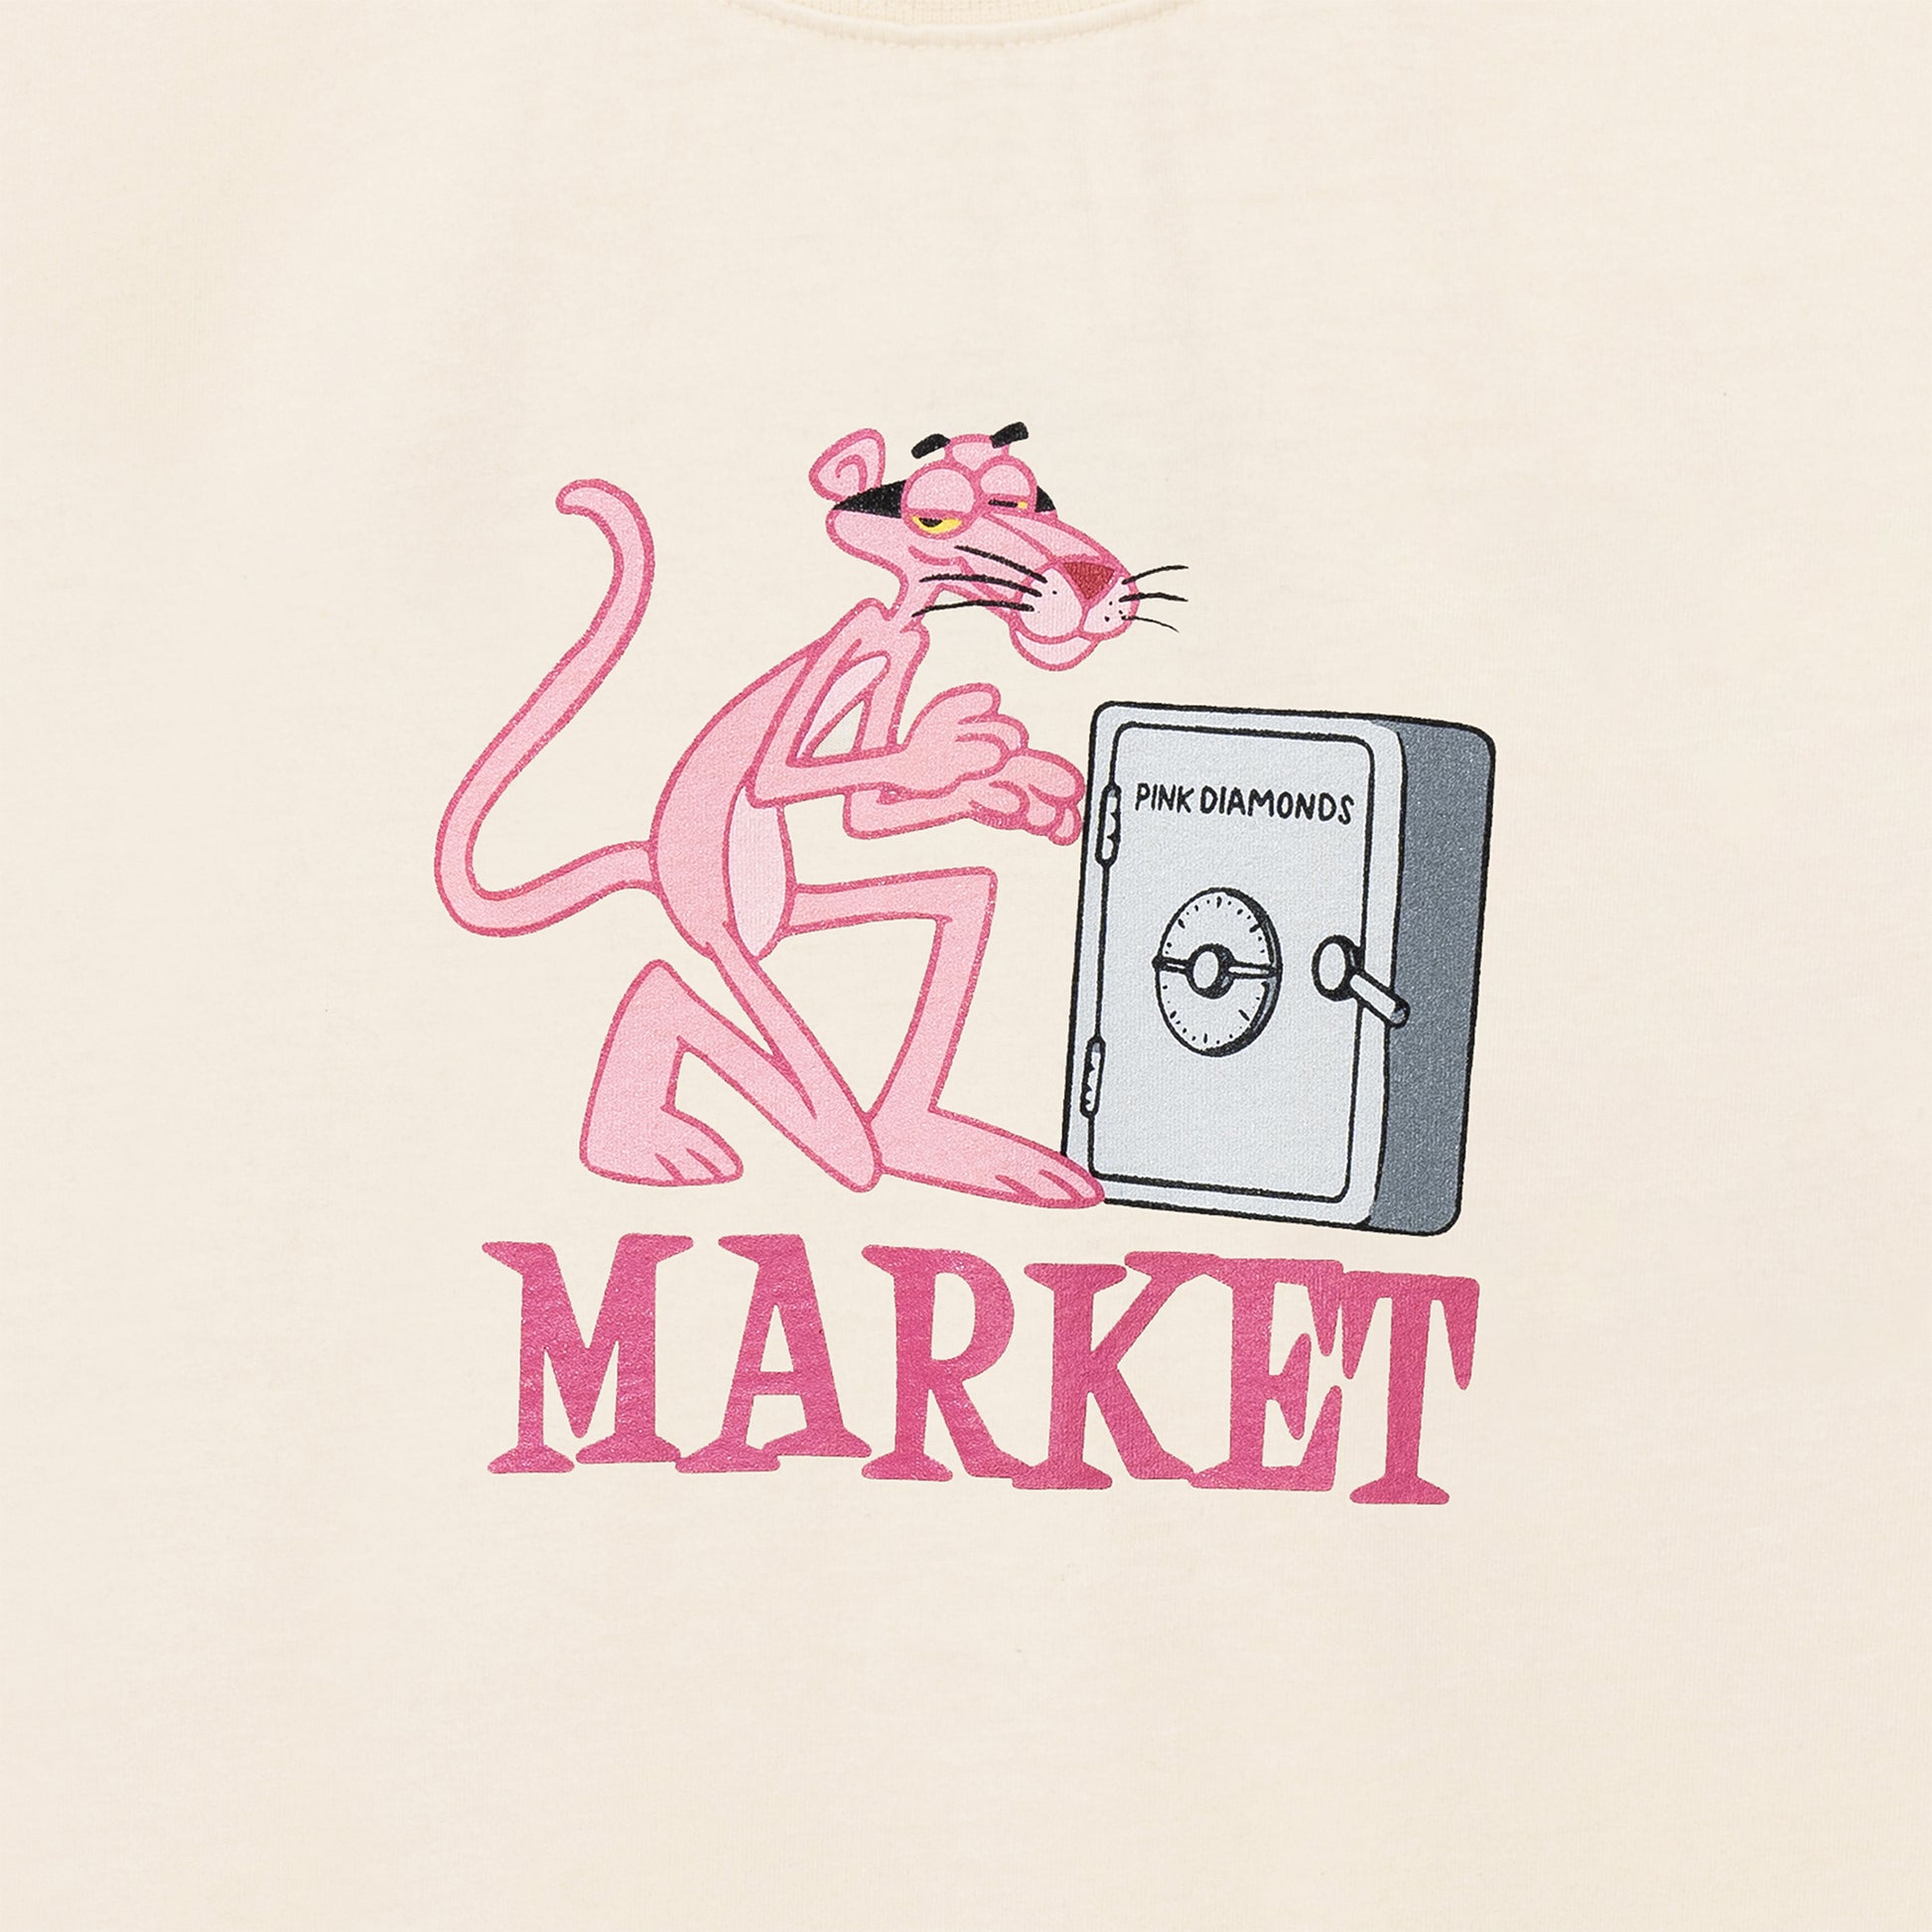 MARKET clothing brand PINK PANTHER CALL MY LAWYER T-SHIRT. Find more graphic tees, hats, hoodies and more at MarketStudios.com. Formally Chinatown Market.